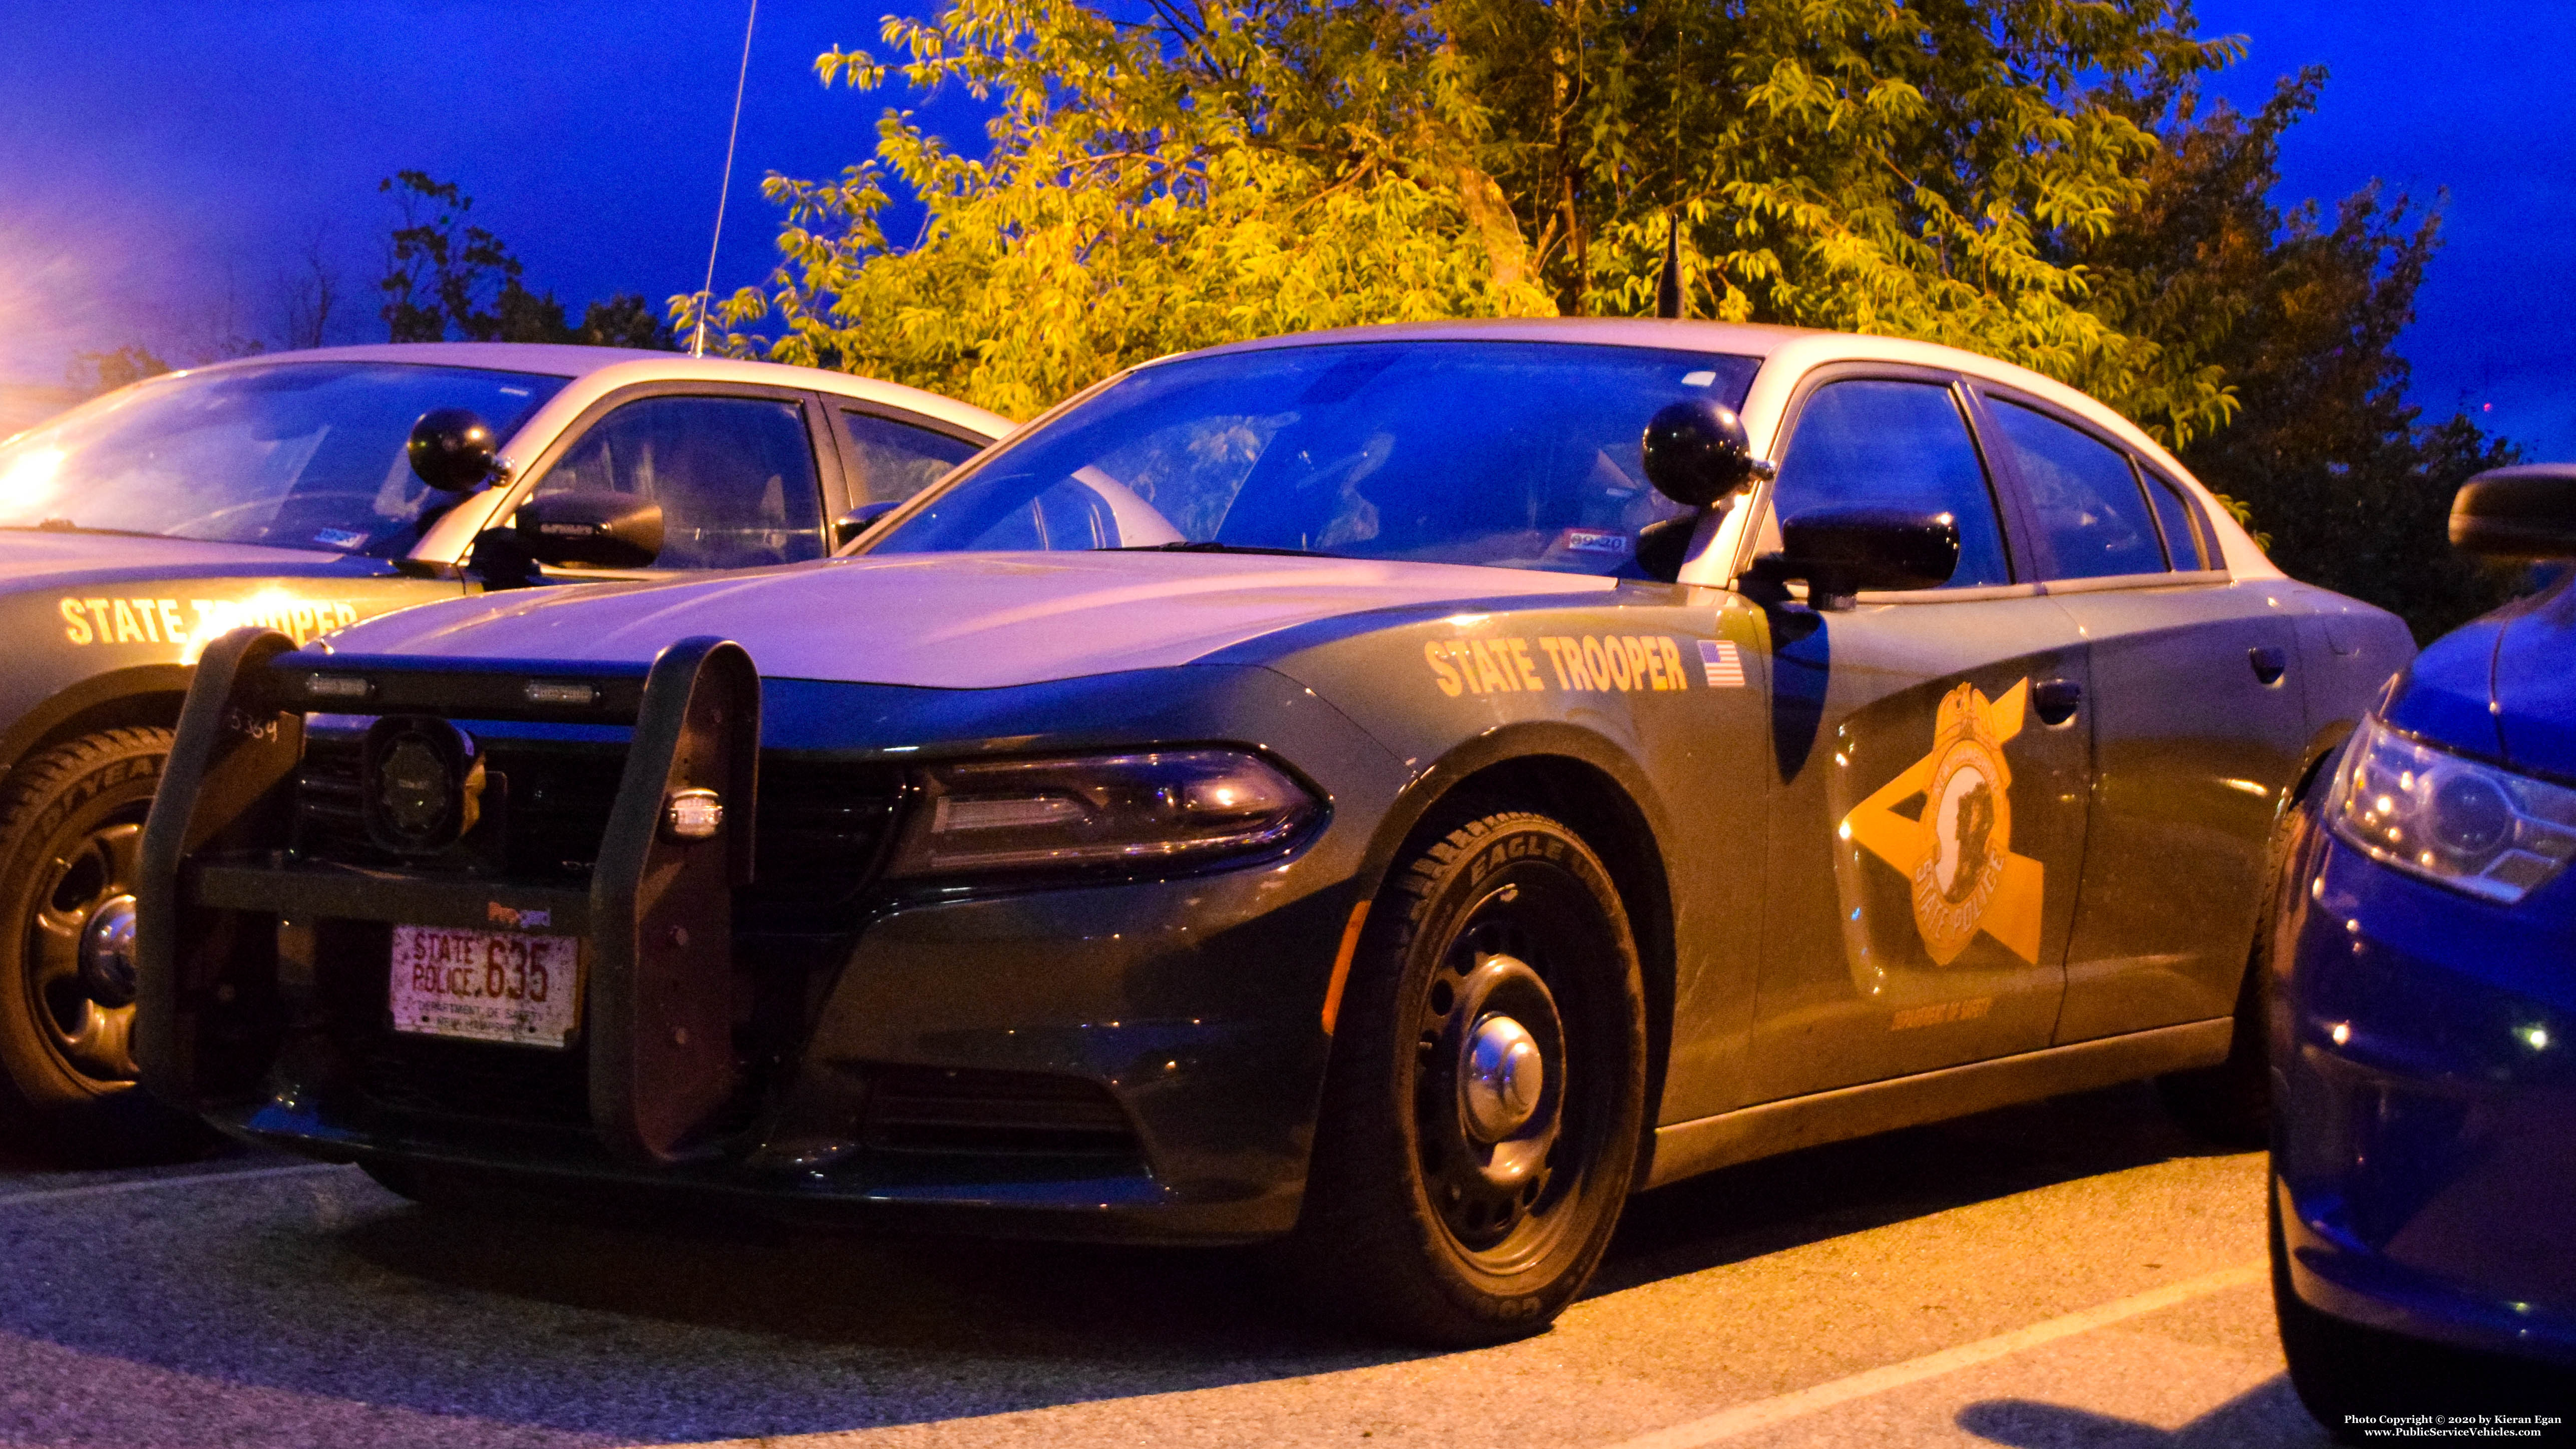 A photo  of New Hampshire State Police
            Cruiser 635, a 2015-2019 Dodge Charger             taken by Kieran Egan